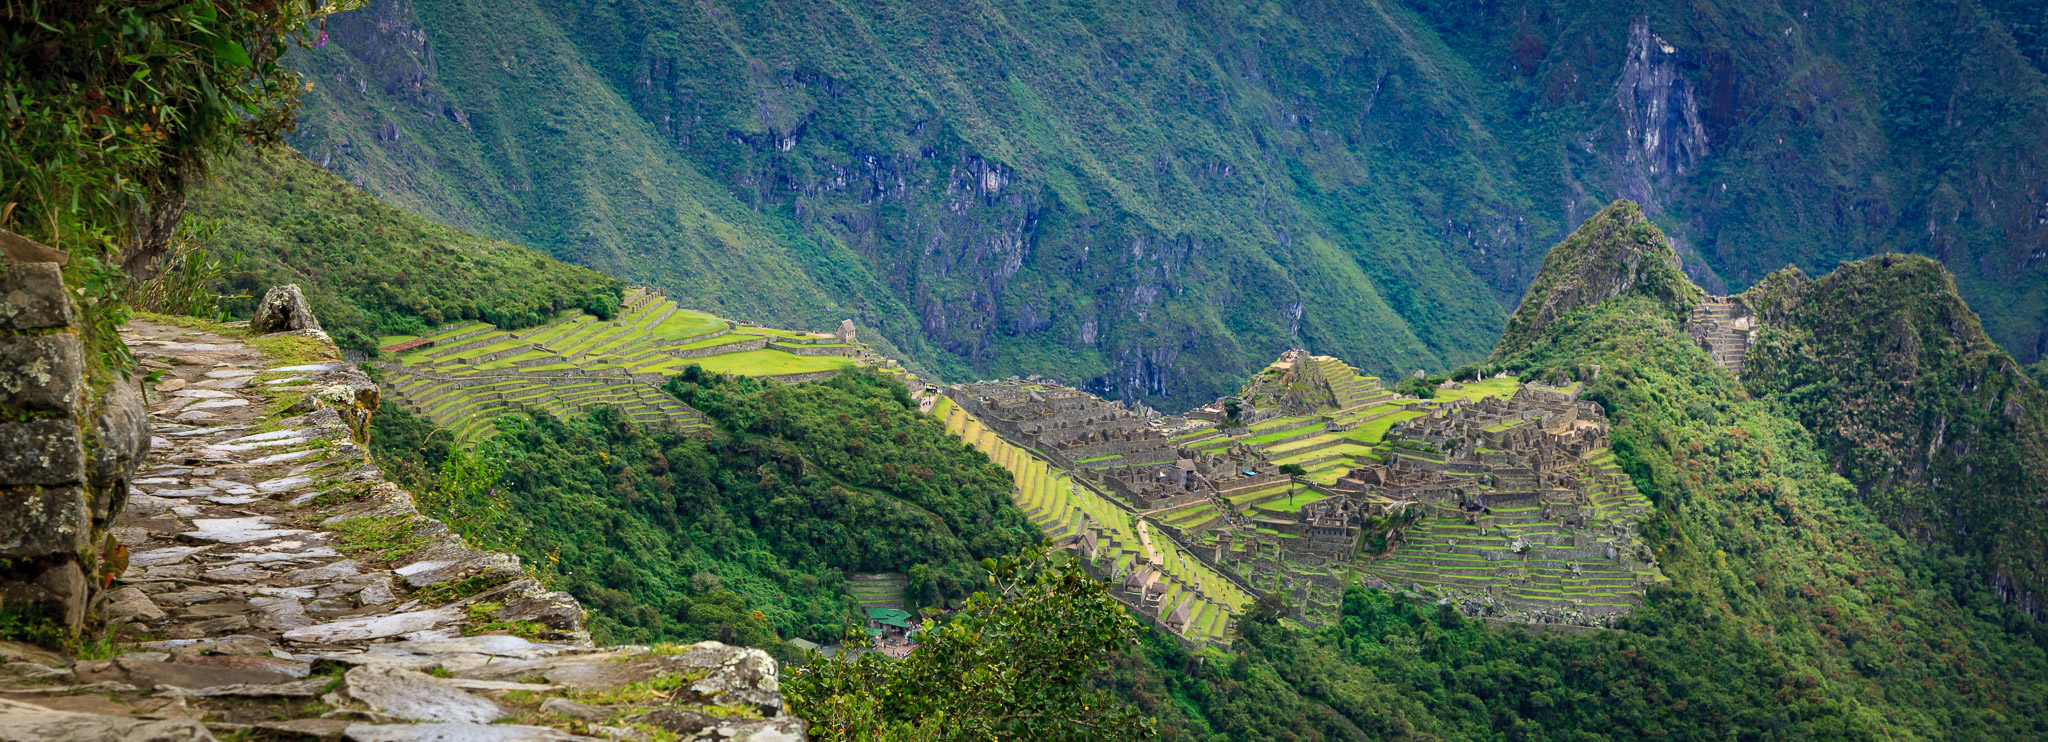 Looking back at Machu Picchu from Inca Trail to Sun Gate